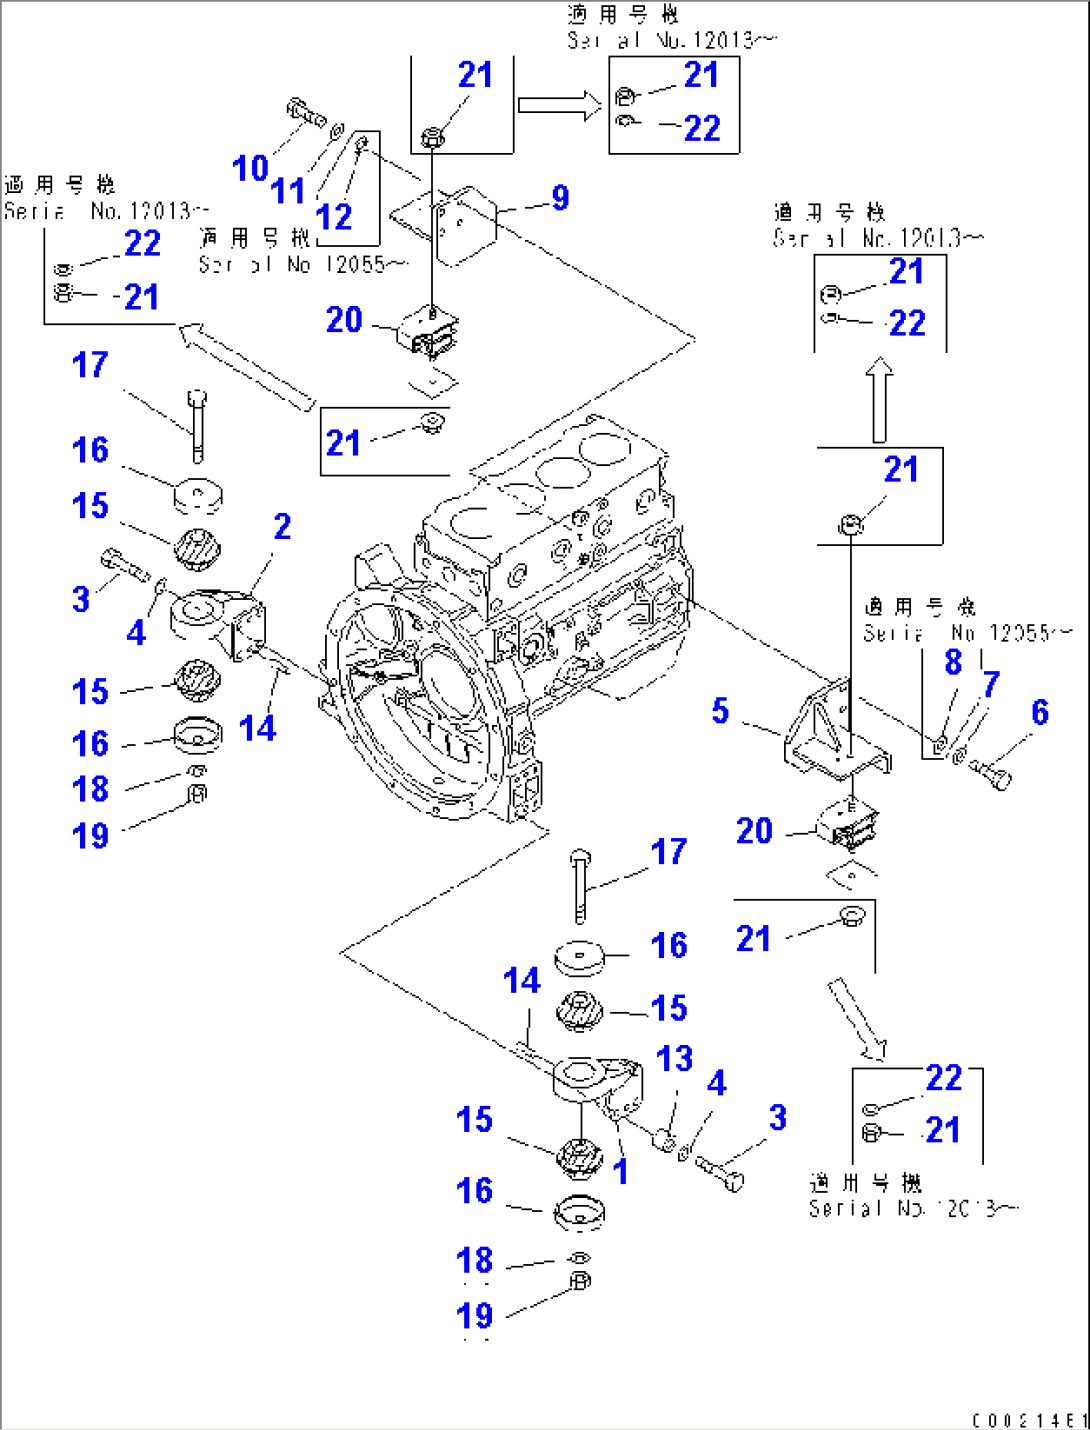 ENGINE MOUNTING PARTS(#11501-)